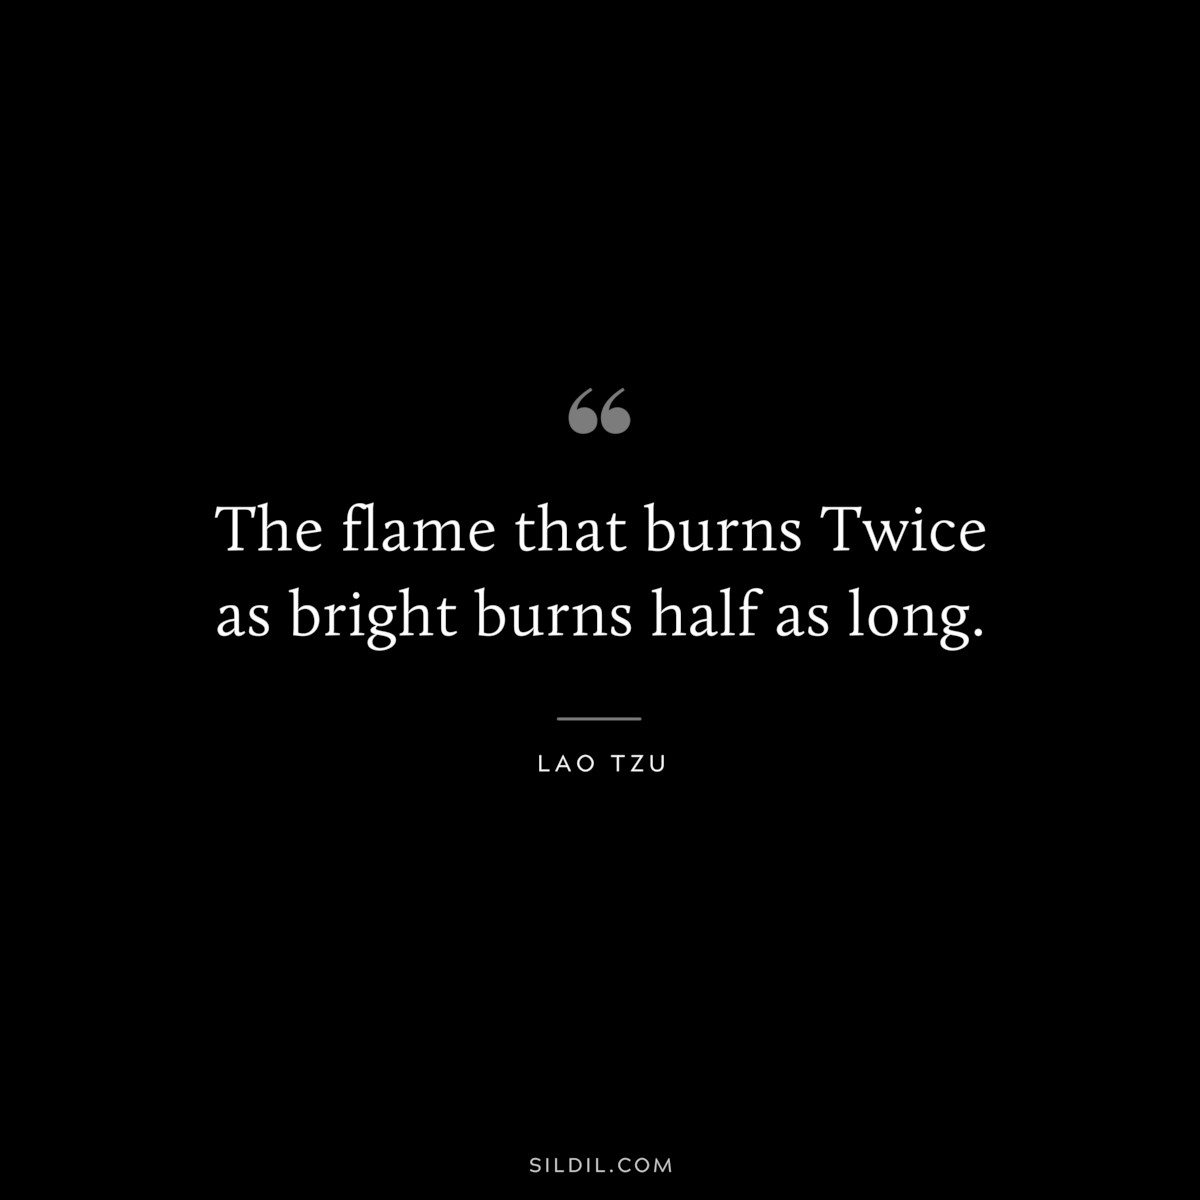 The flame that burns Twice as bright burns half as long. ― Lao Tzu